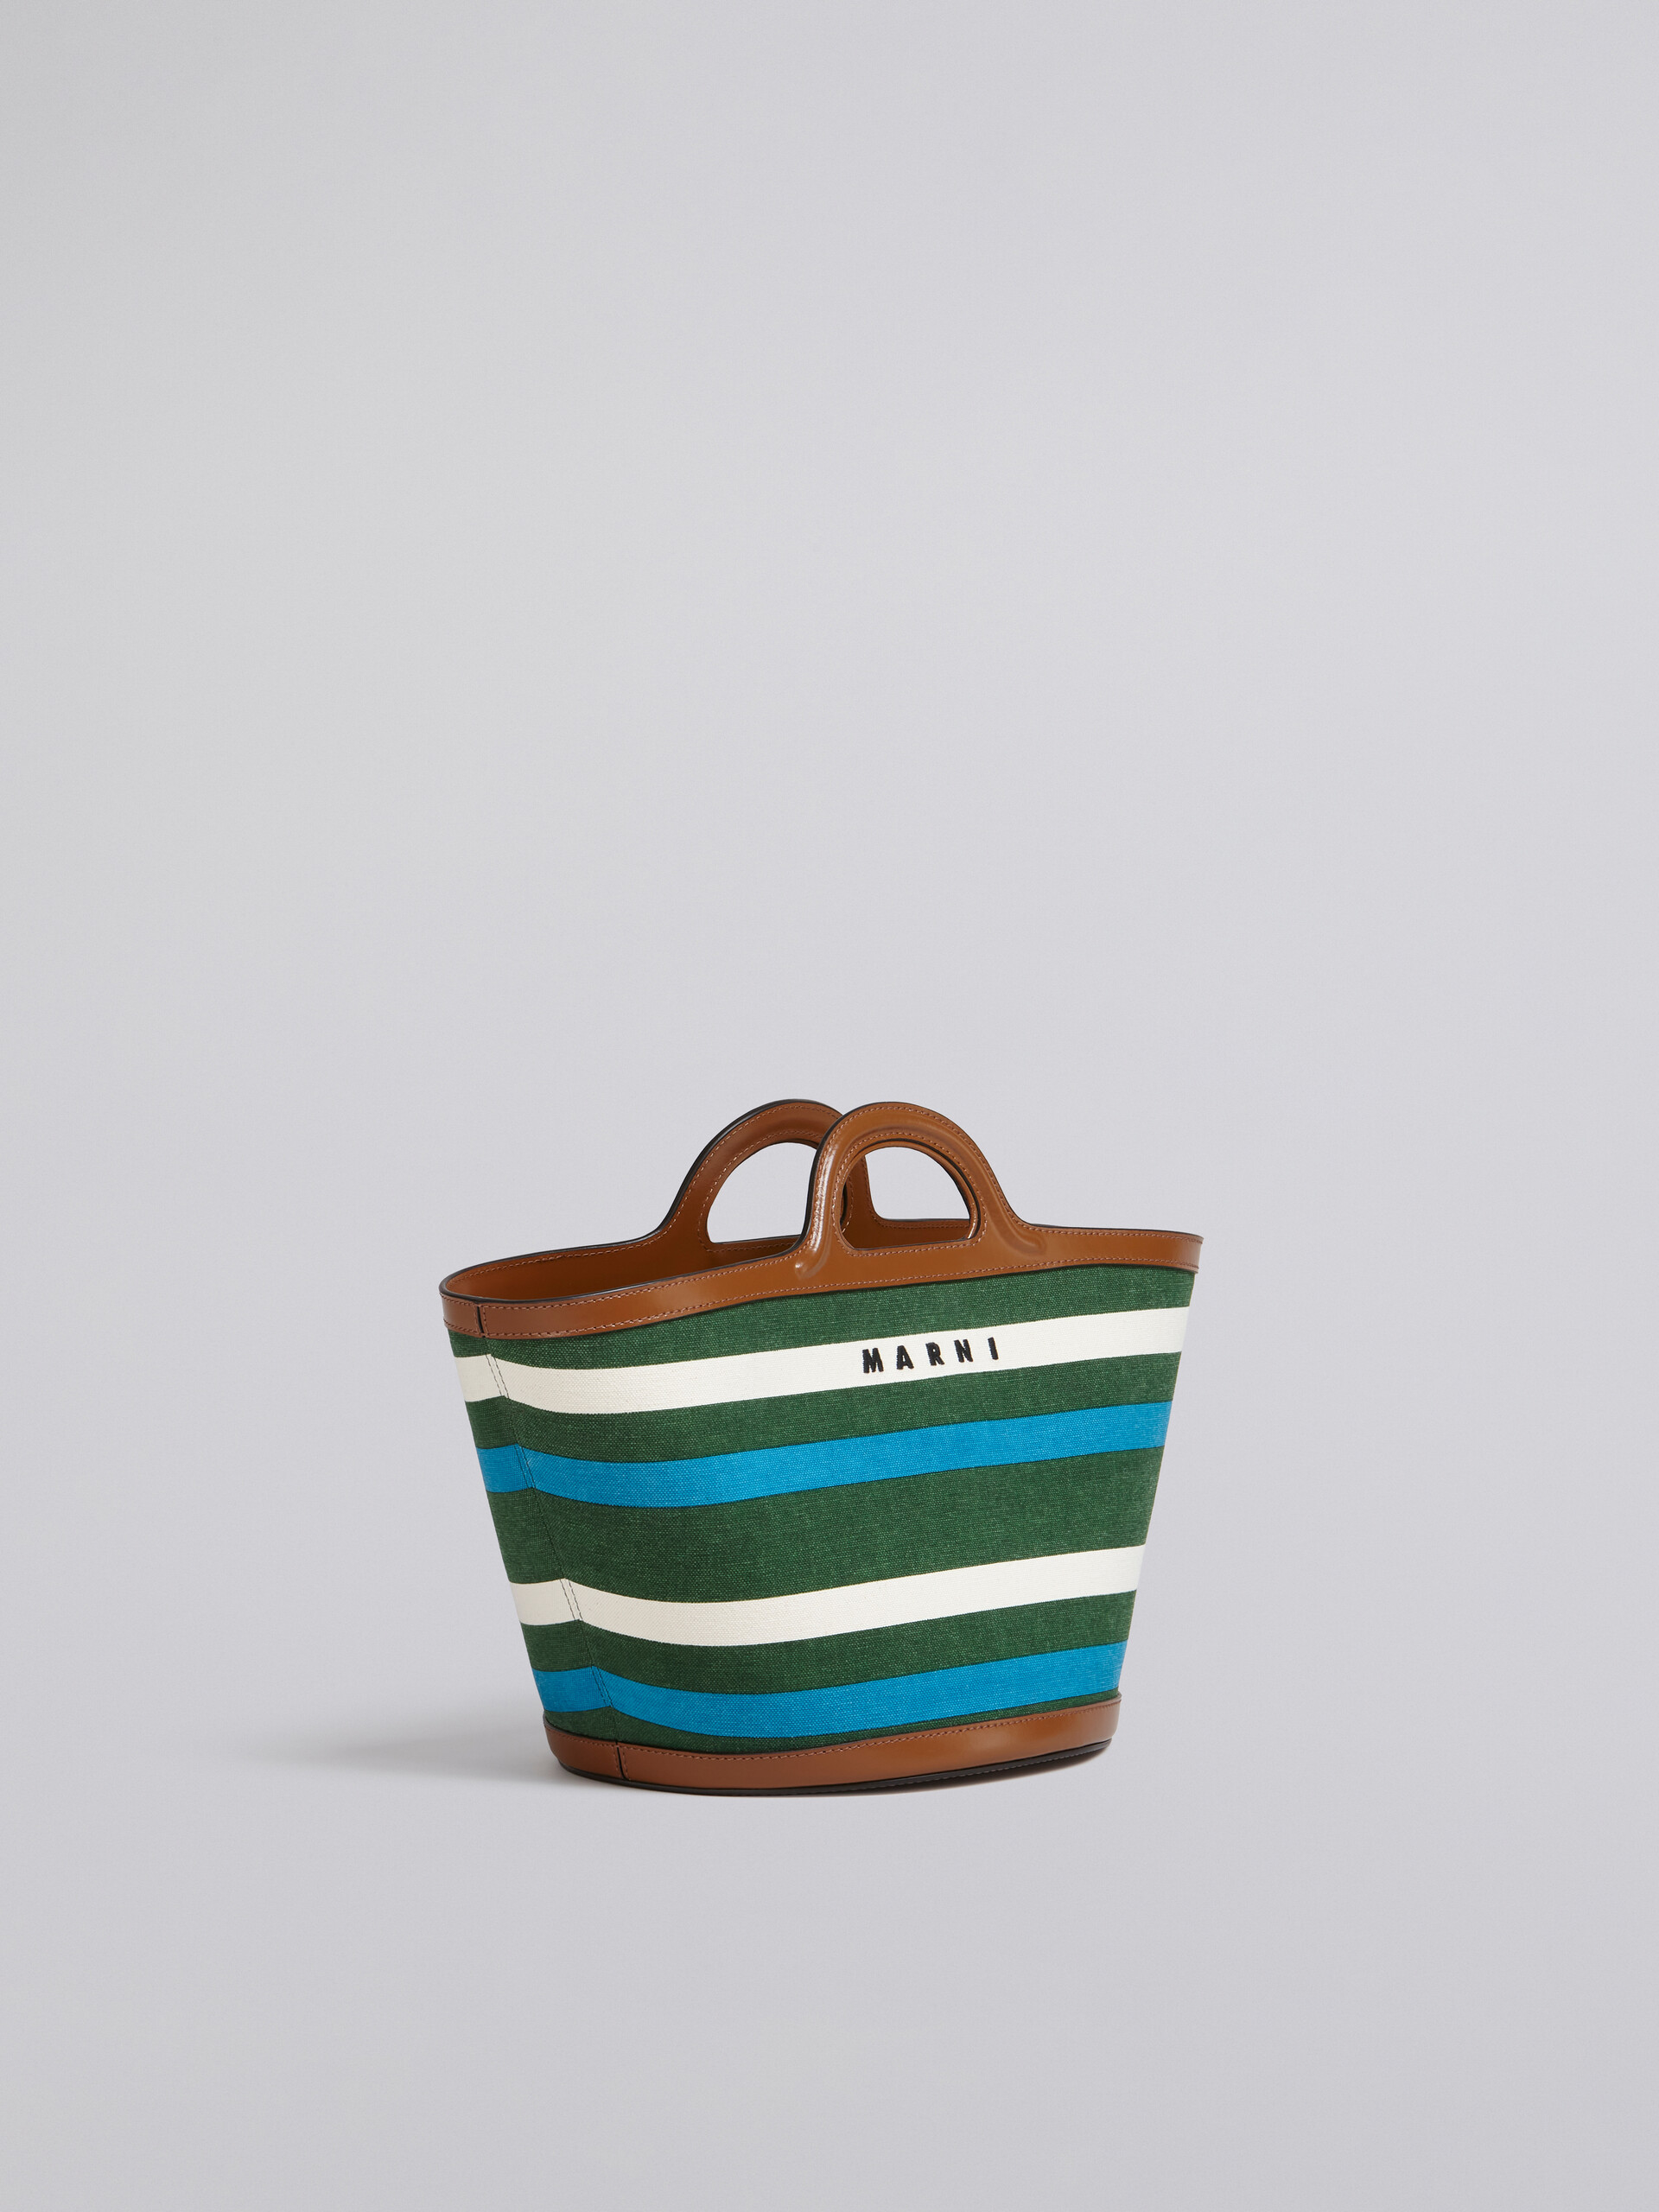 TROPICALIA small bag in leather and striped canvas - Handbag - Image 6